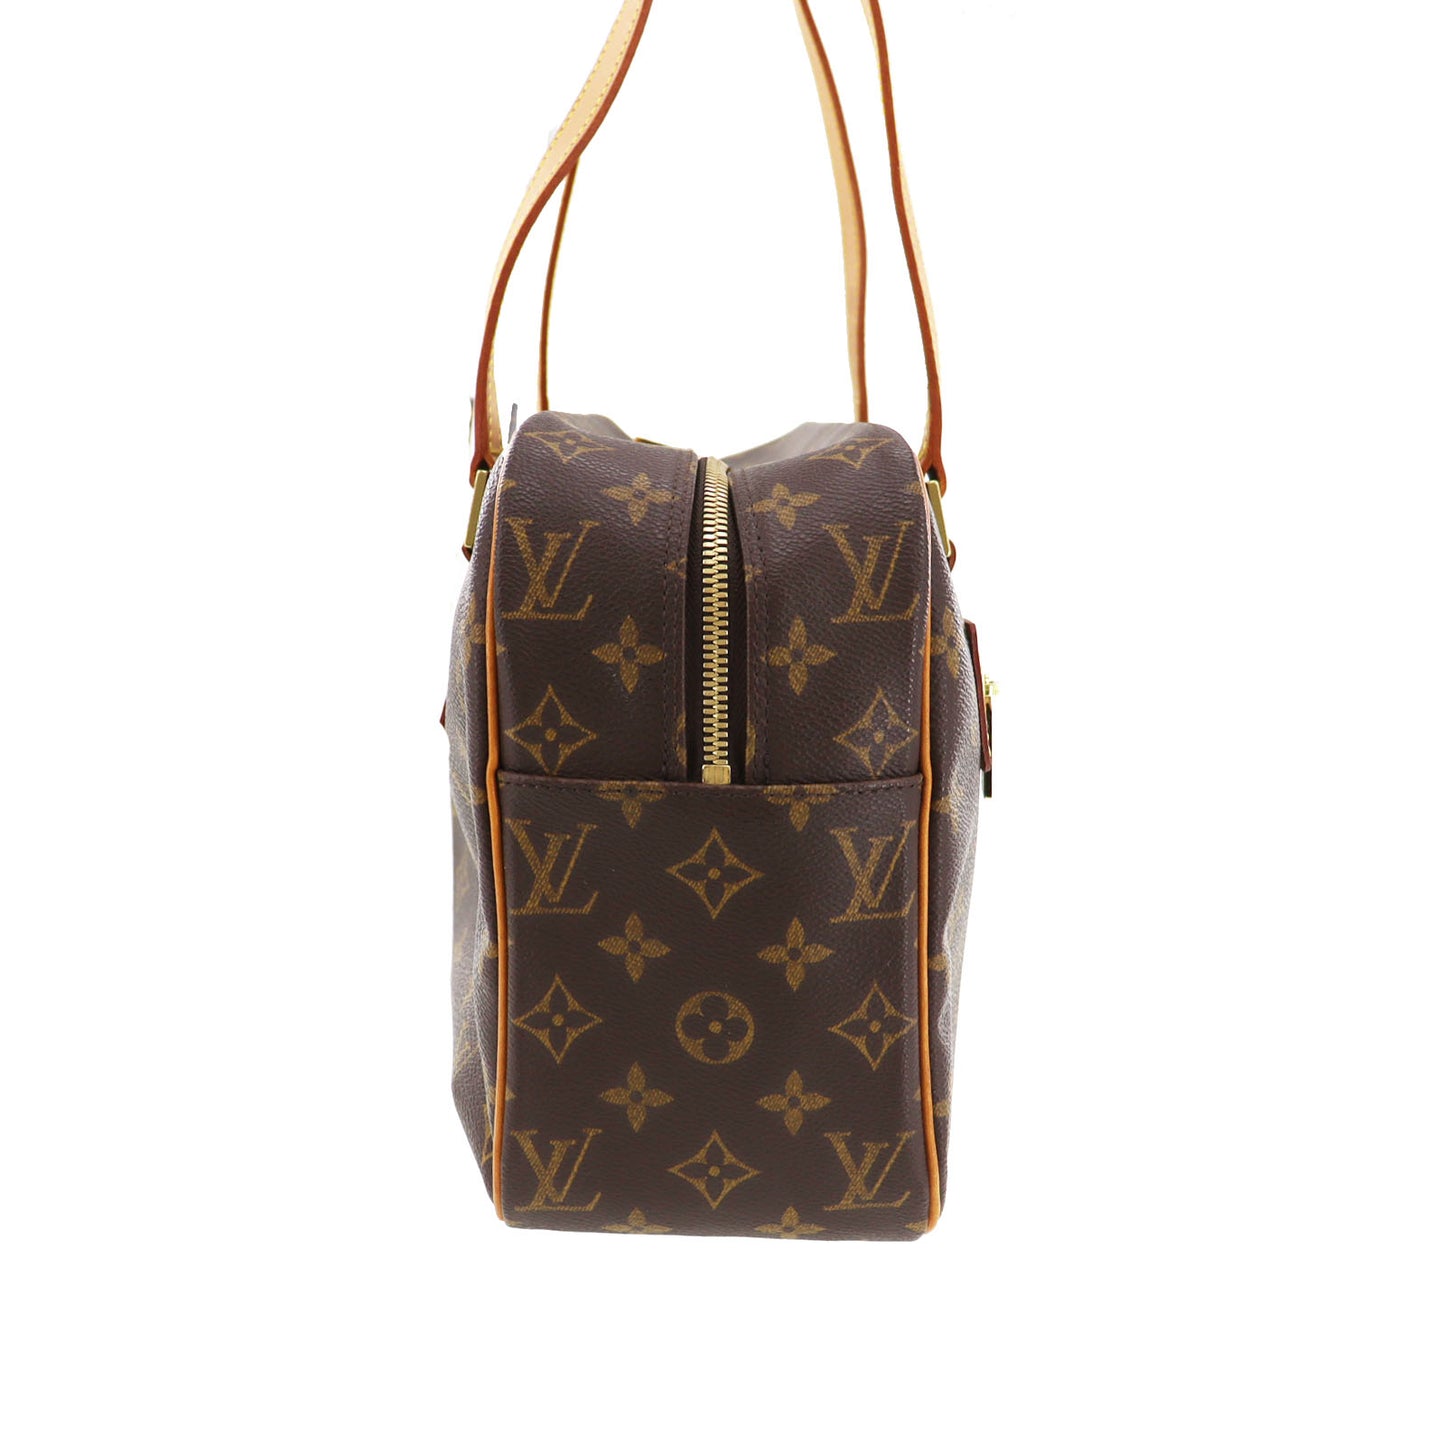 Buy [Used] LOUIS VUITTON Cite GM Shoulder Bag Monogram Brown M51181 from  Japan - Buy authentic Plus exclusive items from Japan